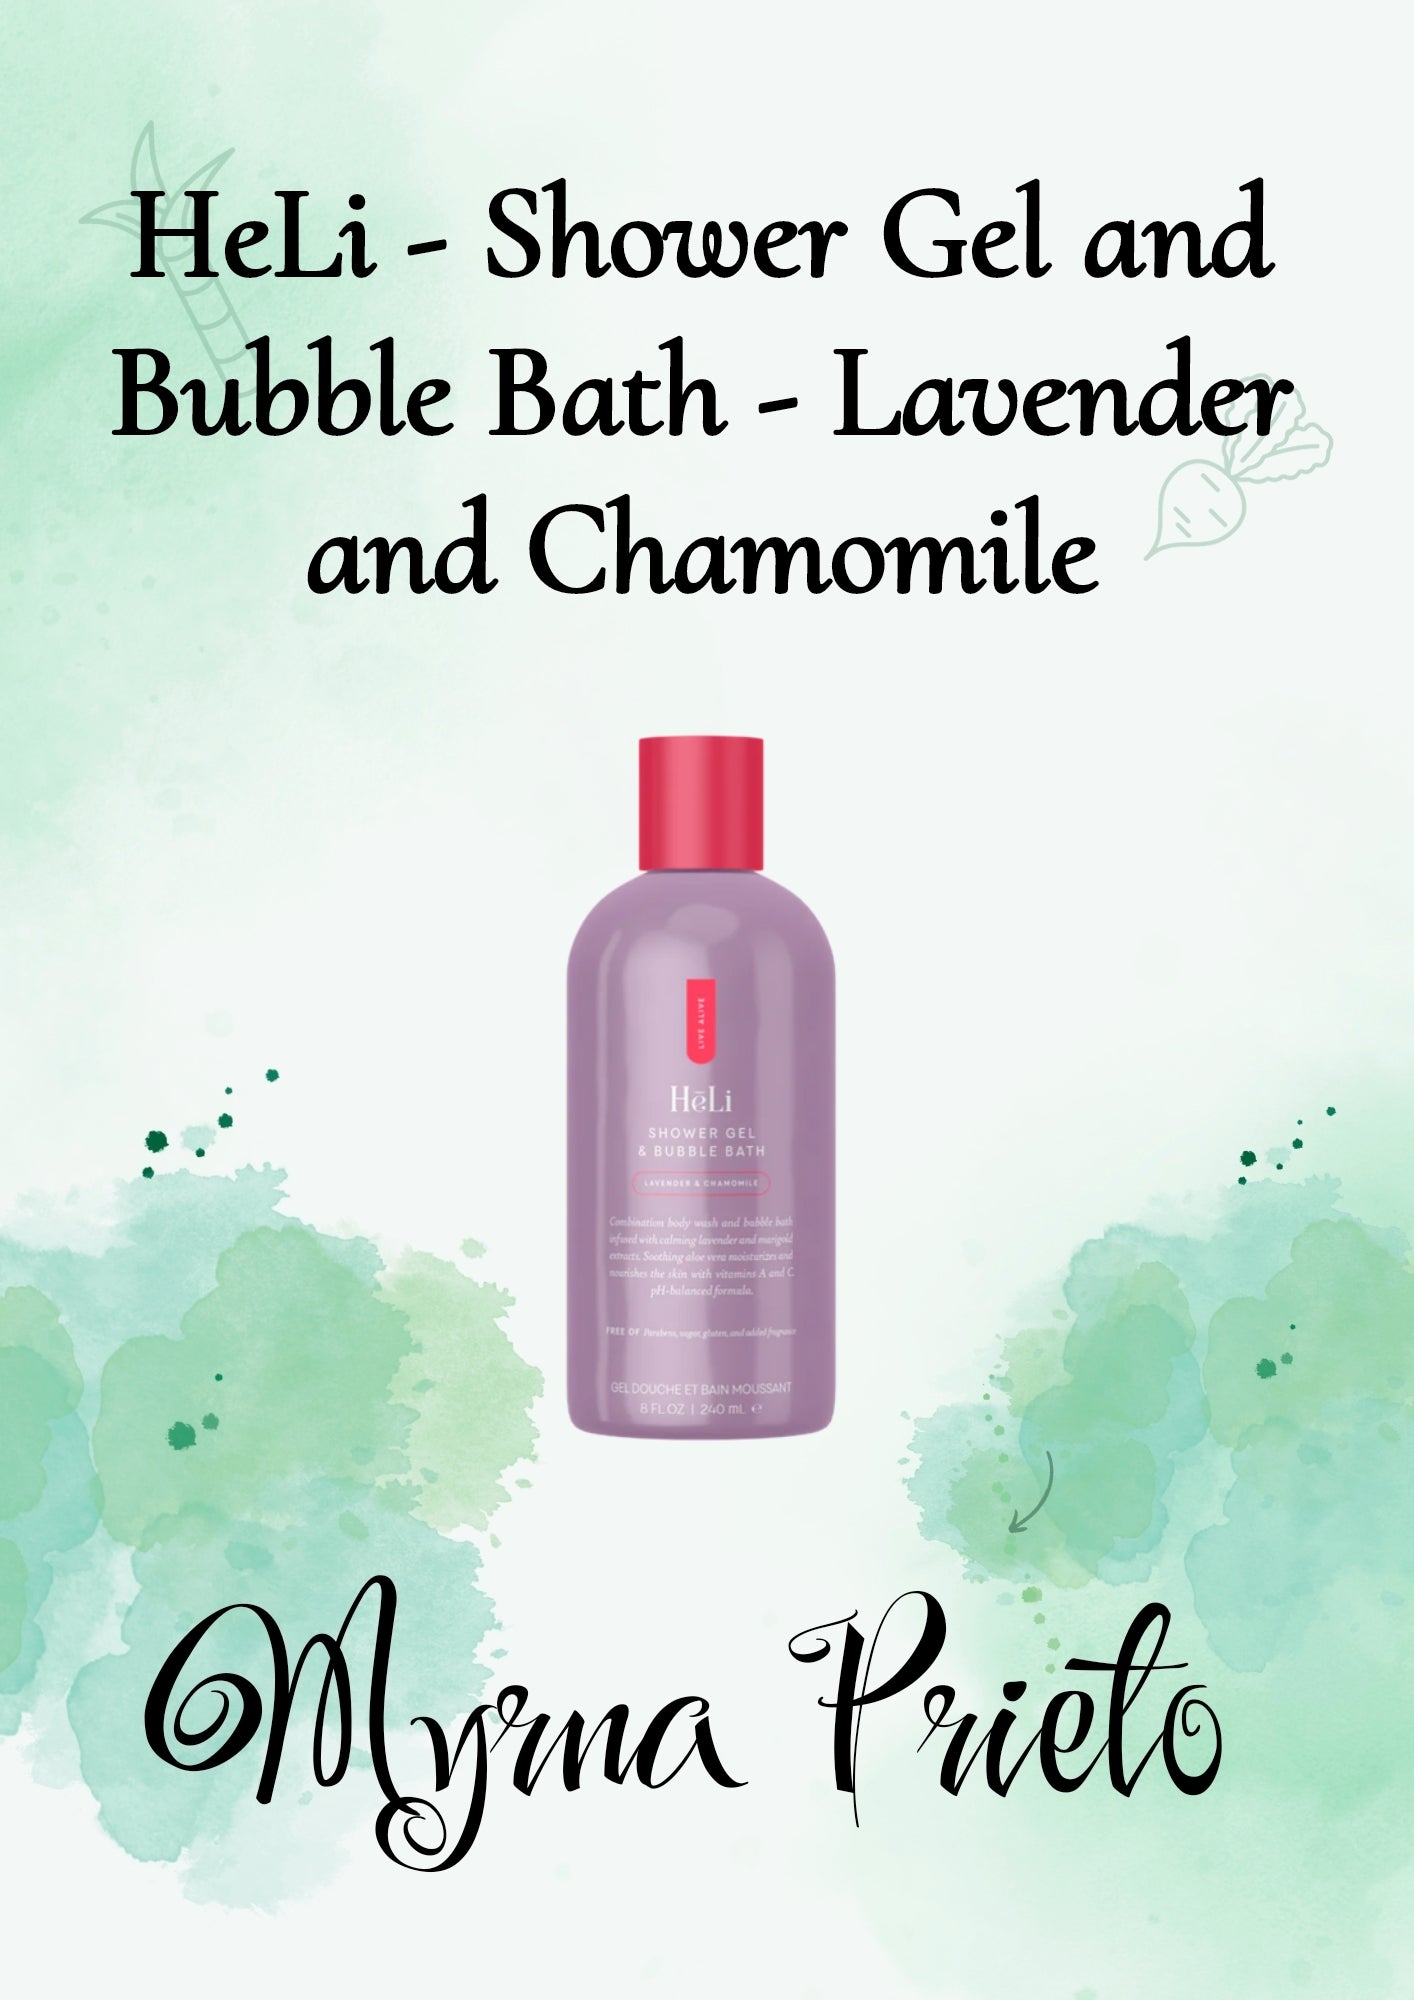 HeLi - Shower Gel and Bubble Bath - Lavender and Chamomile